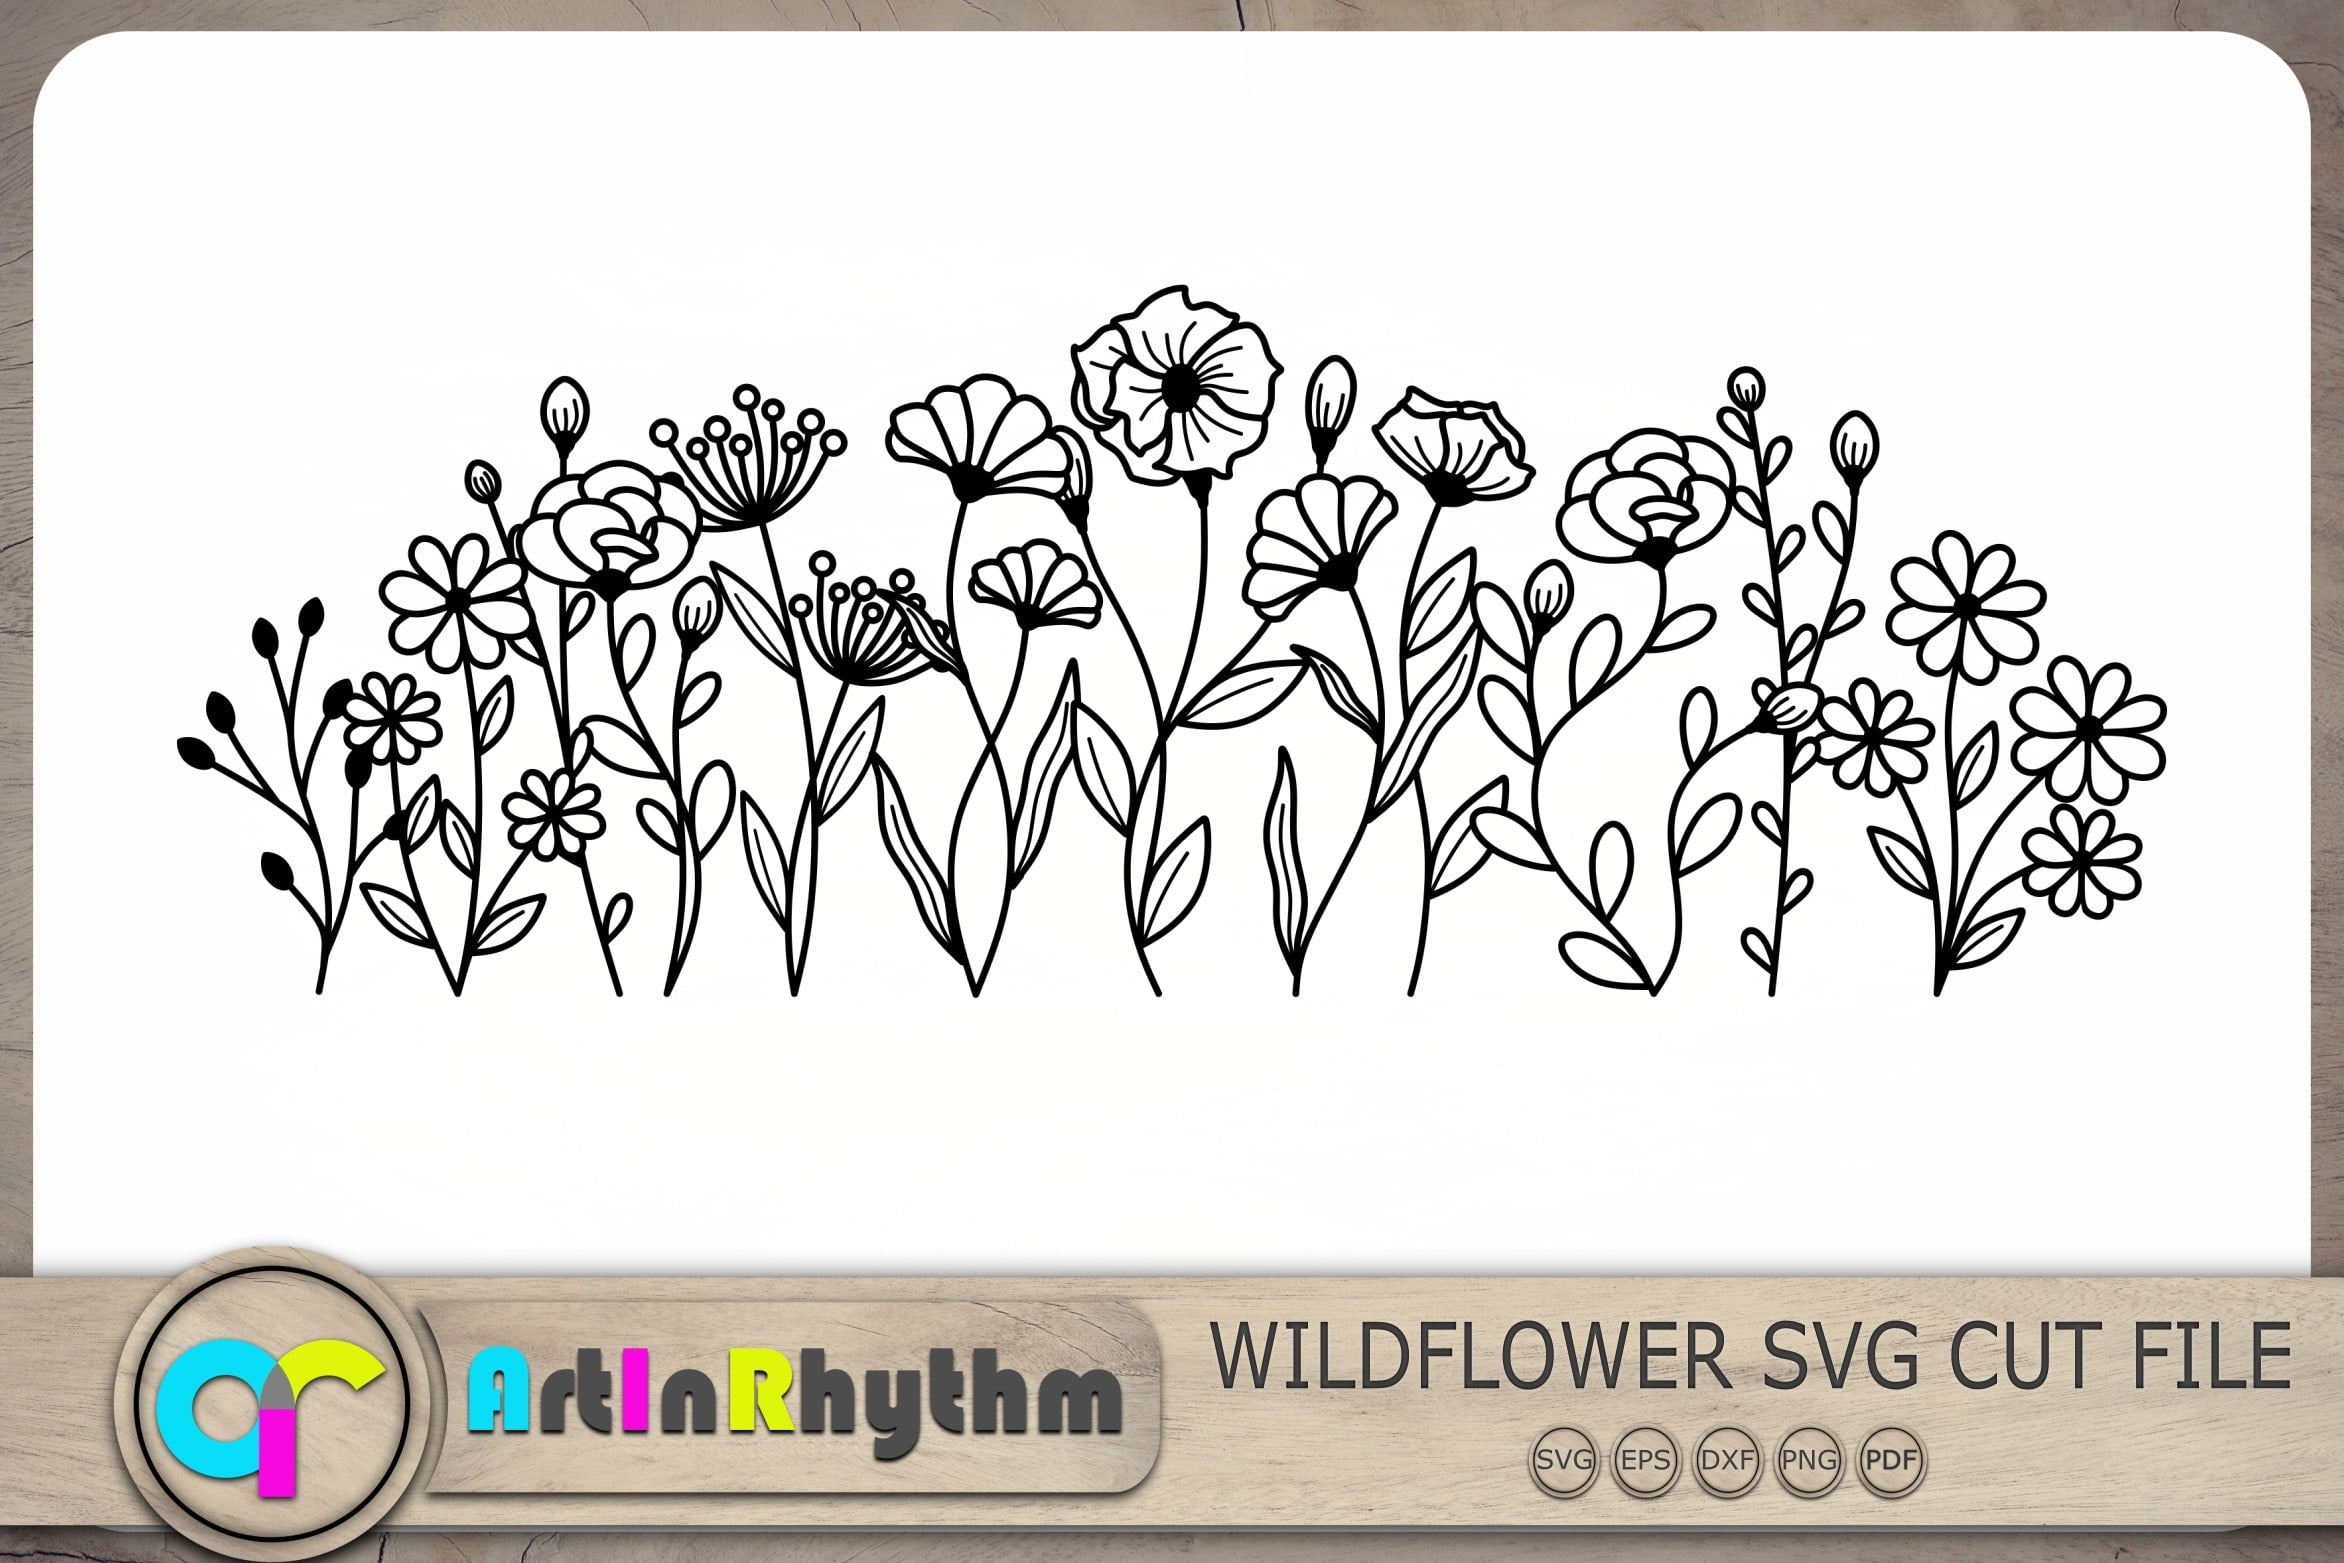 Wildflowers SVG, Flower SVG, Floral SVG, Hand Drawn Flowers SVG, PNG, DXF,  EPS, Cut Files for Cricut and Silhouette